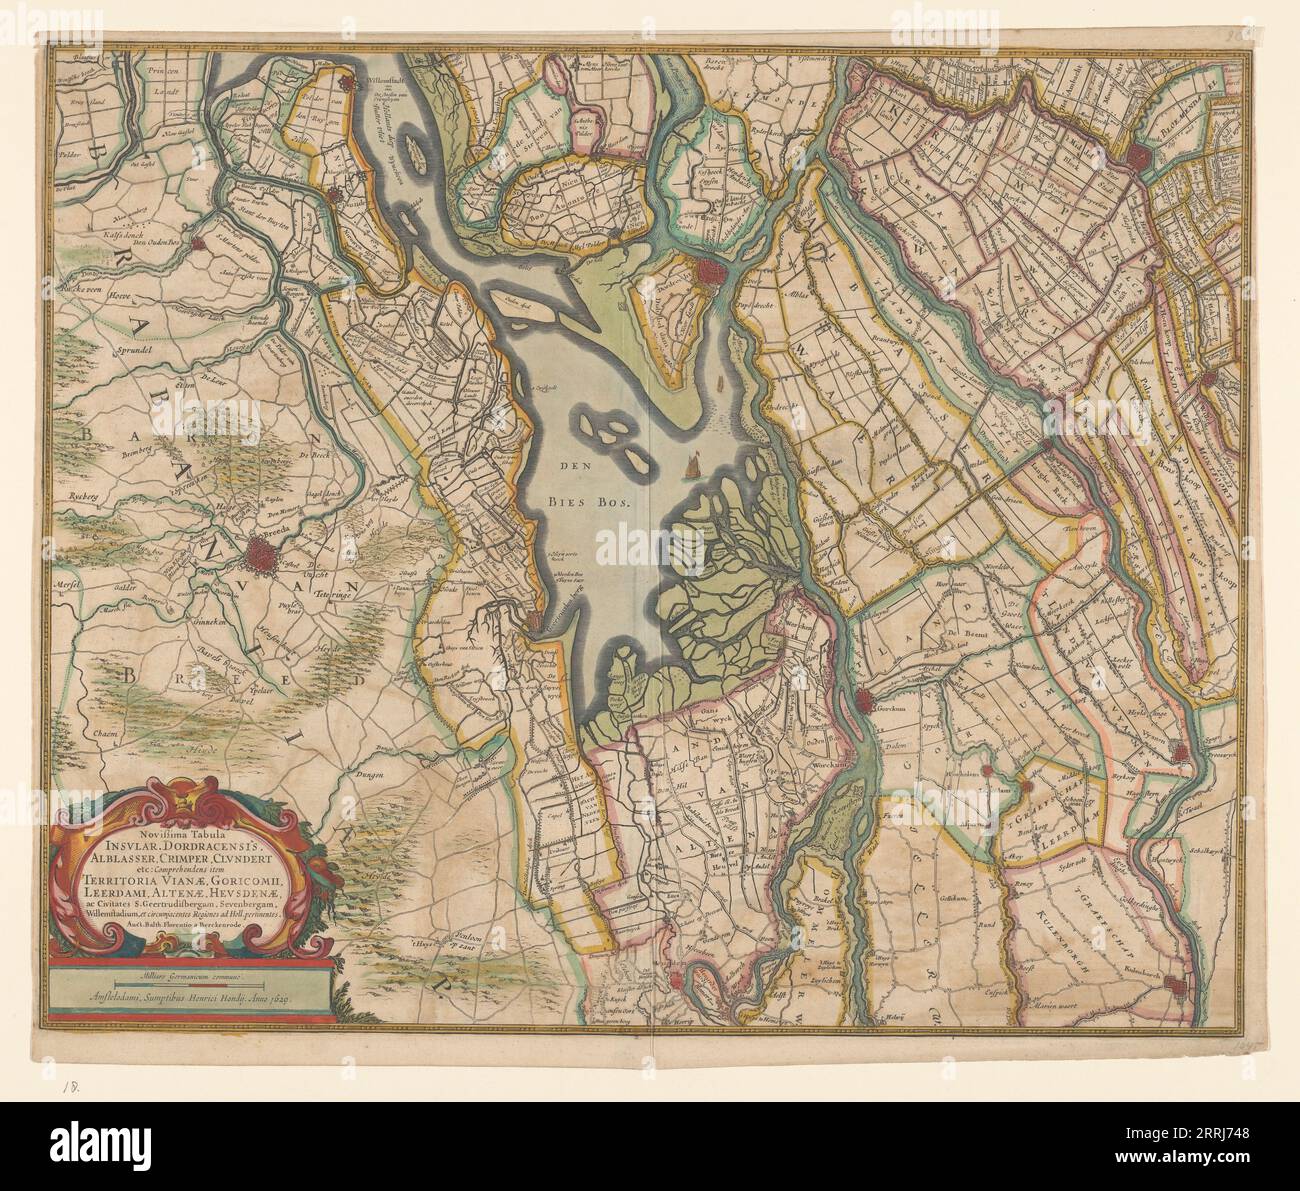 Map of parts of North Brabant, South Holland and Gelderland, 1629. The surroundings of the Bies Bos, sailing ship. Bottom left a cartouche with the title with the scale in German miles (1: 100,000). Stock Photo